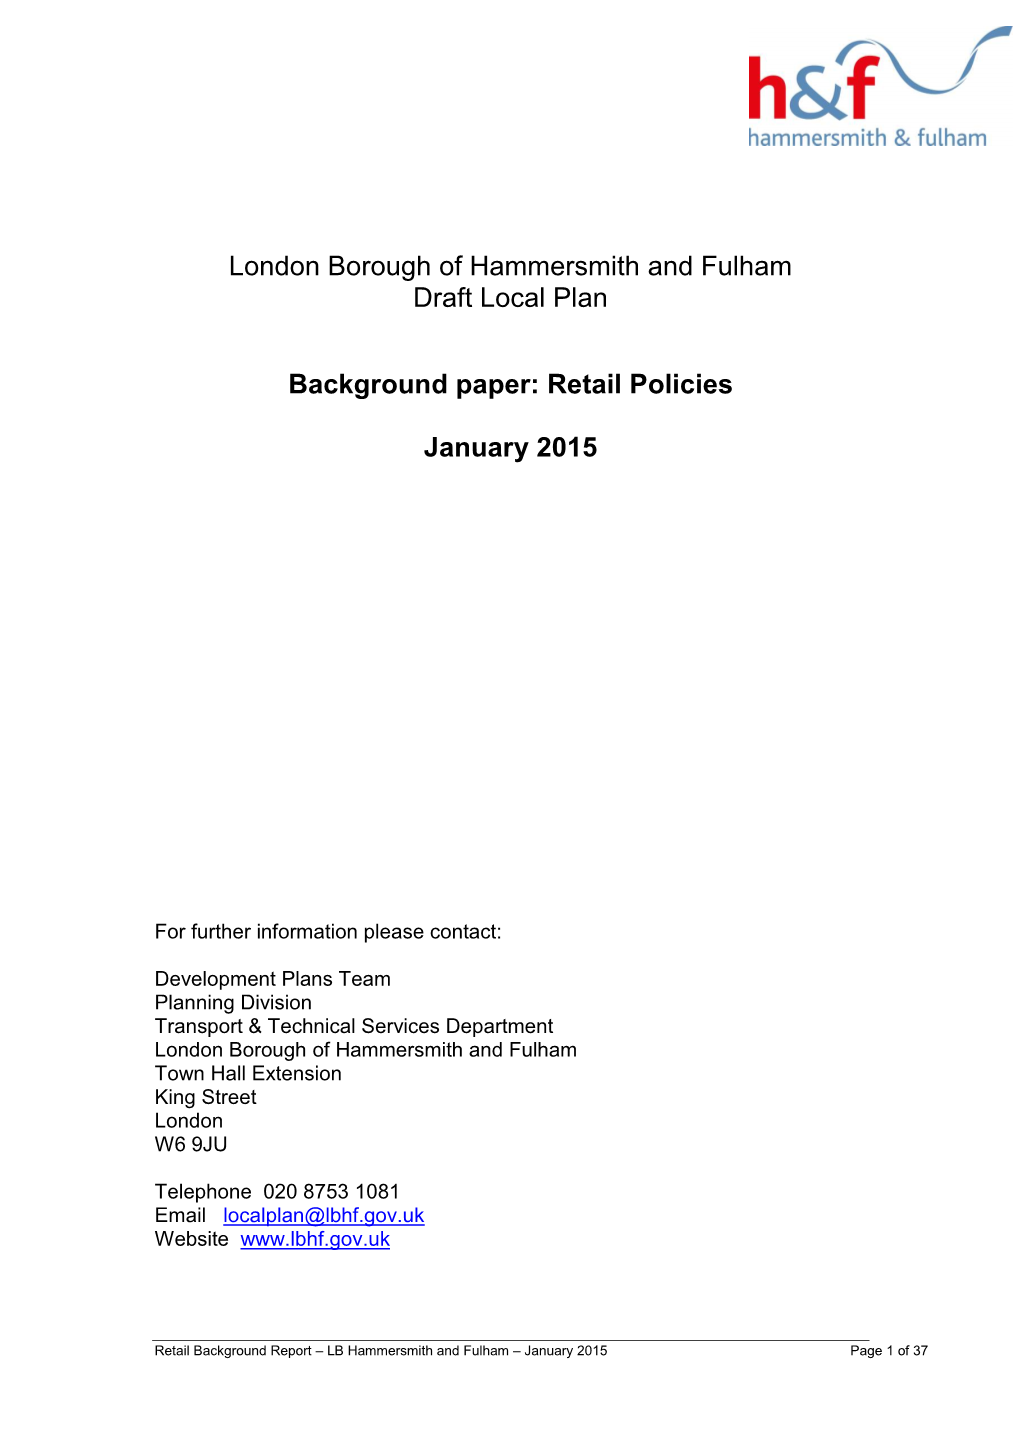 London Borough of Hammersmith and Fulham Draft Local Plan